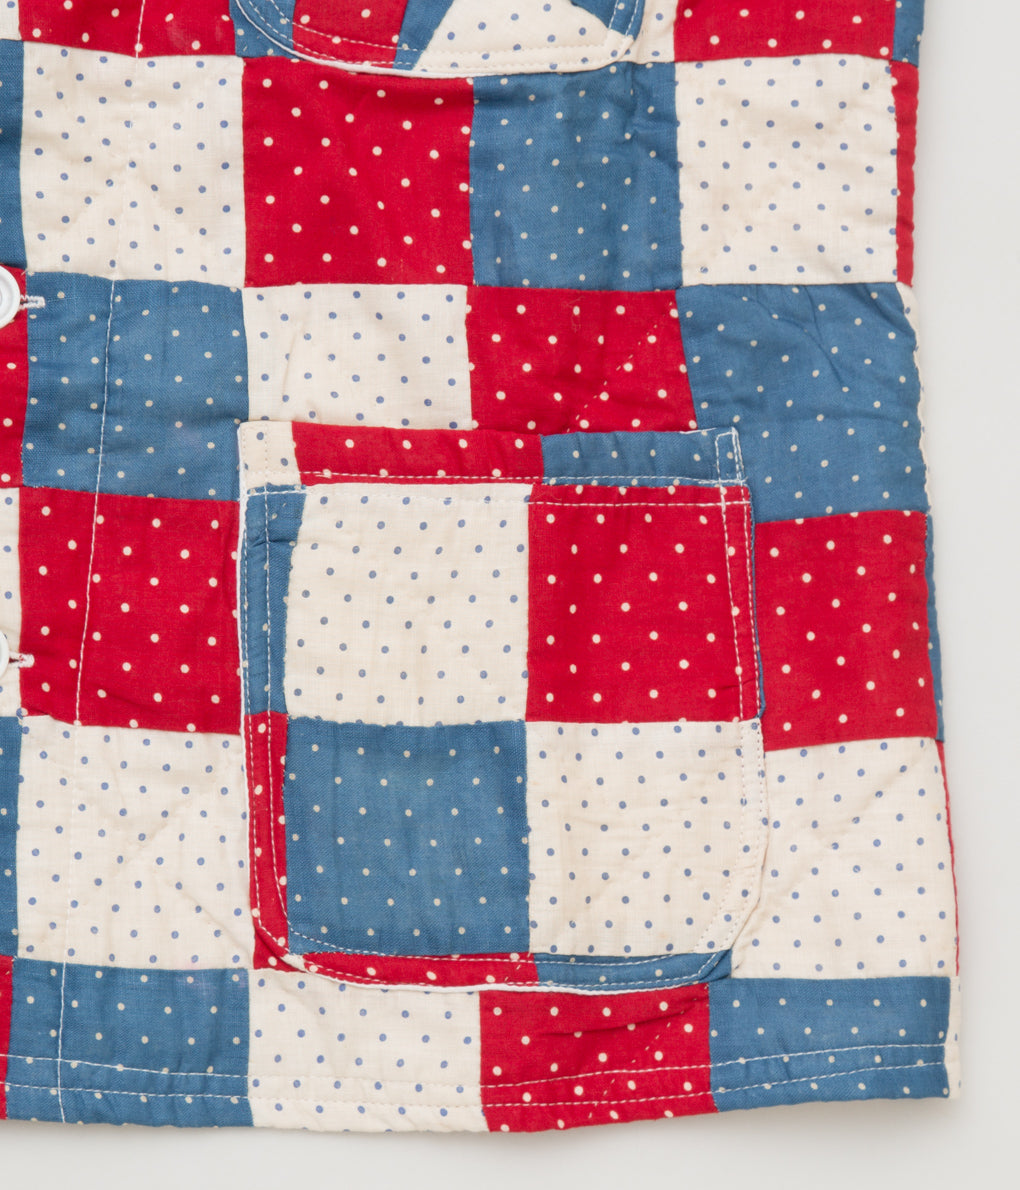 FAREWELL FRANCES "CLAUDE QUILTED VEST" (RED/BLUE MULTI)